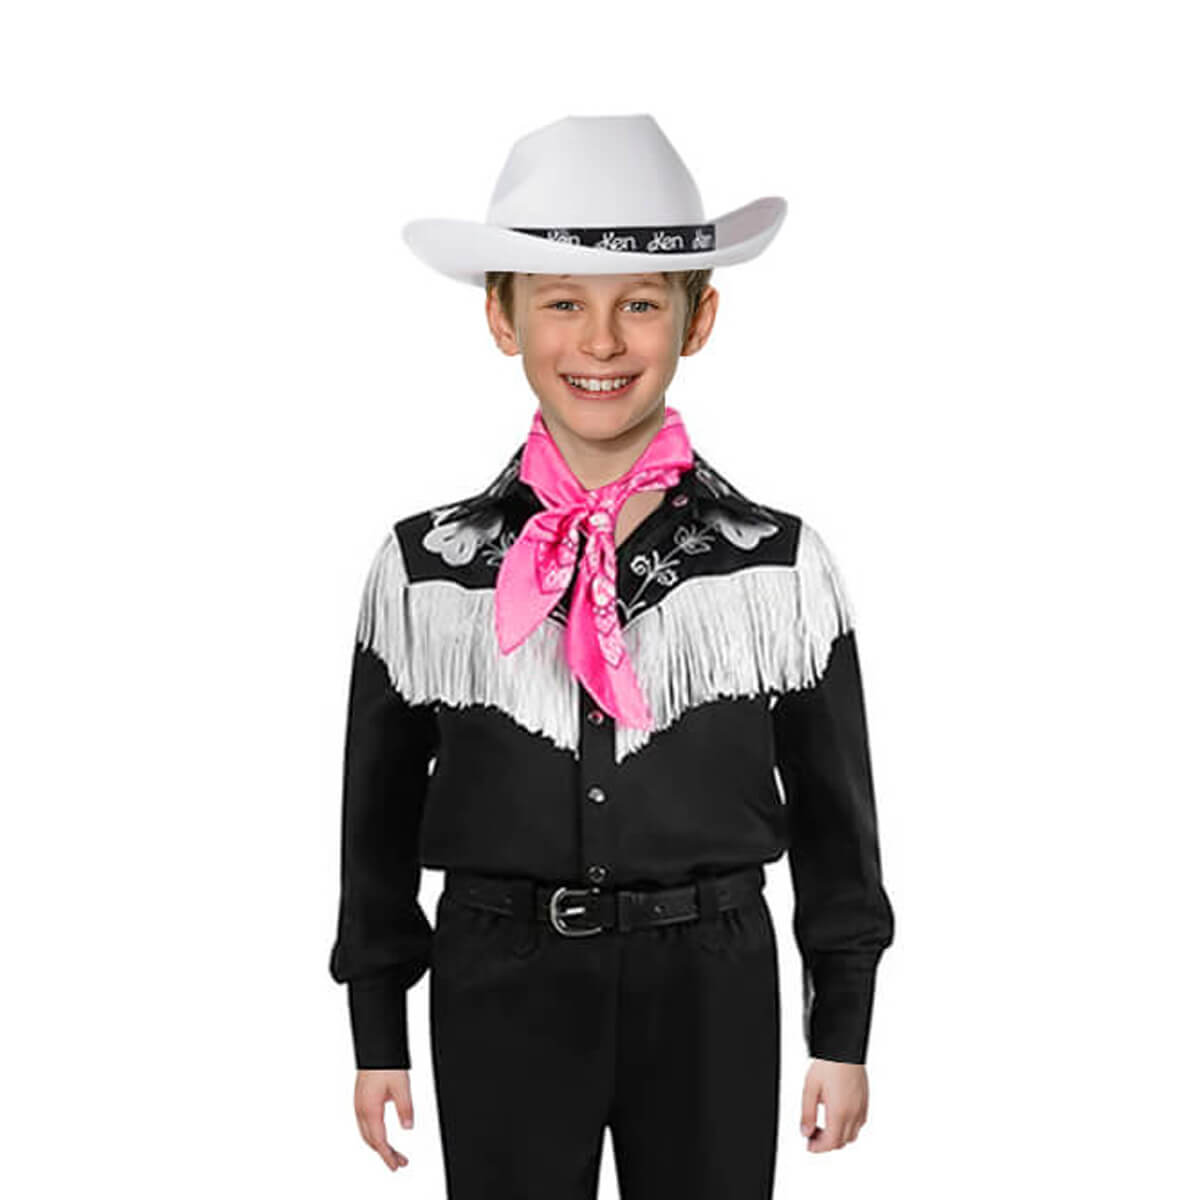 Ken Cowboy Outfit Halloween Costume Barbiecore Movie 80s Cowboy Jacket with Scarf For Adult and Kids